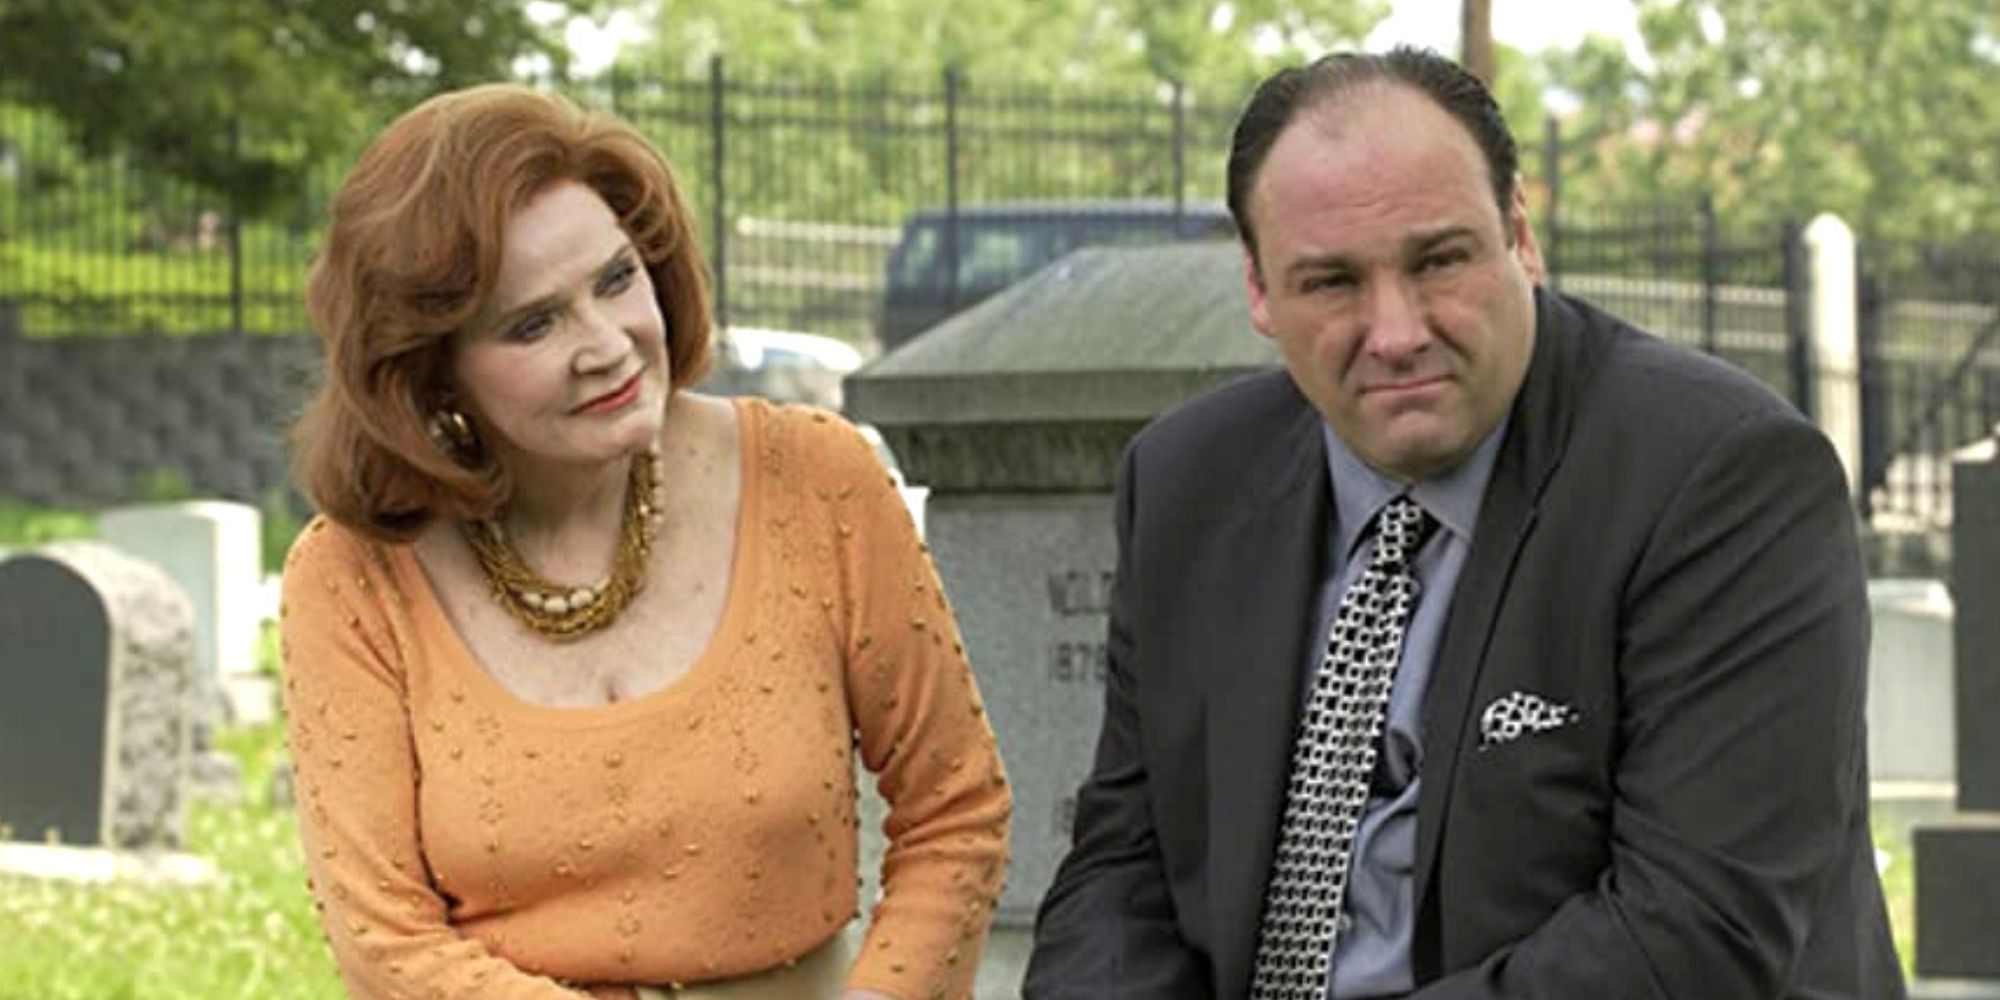 Polly Bergen sitting next to James Gandolfini looking at him while he looks away in the opposite direction in The Sopranos